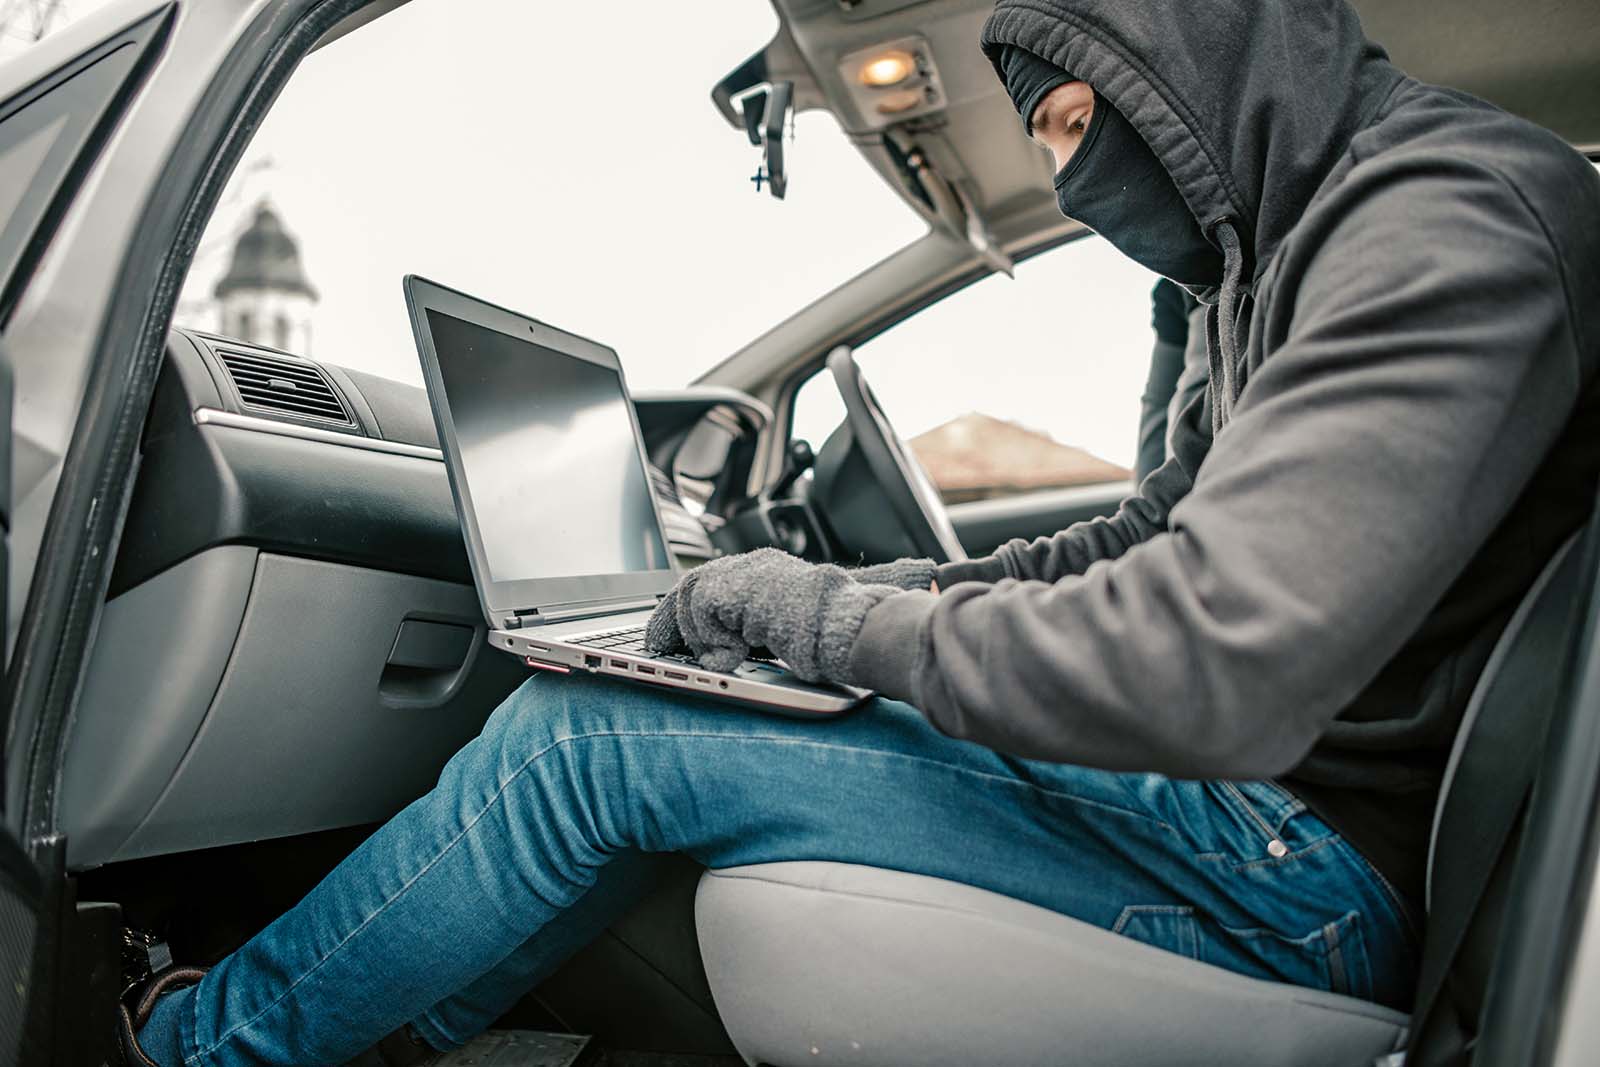 Cybersecurity regulations: Are non-compliant cars more vulnerable?